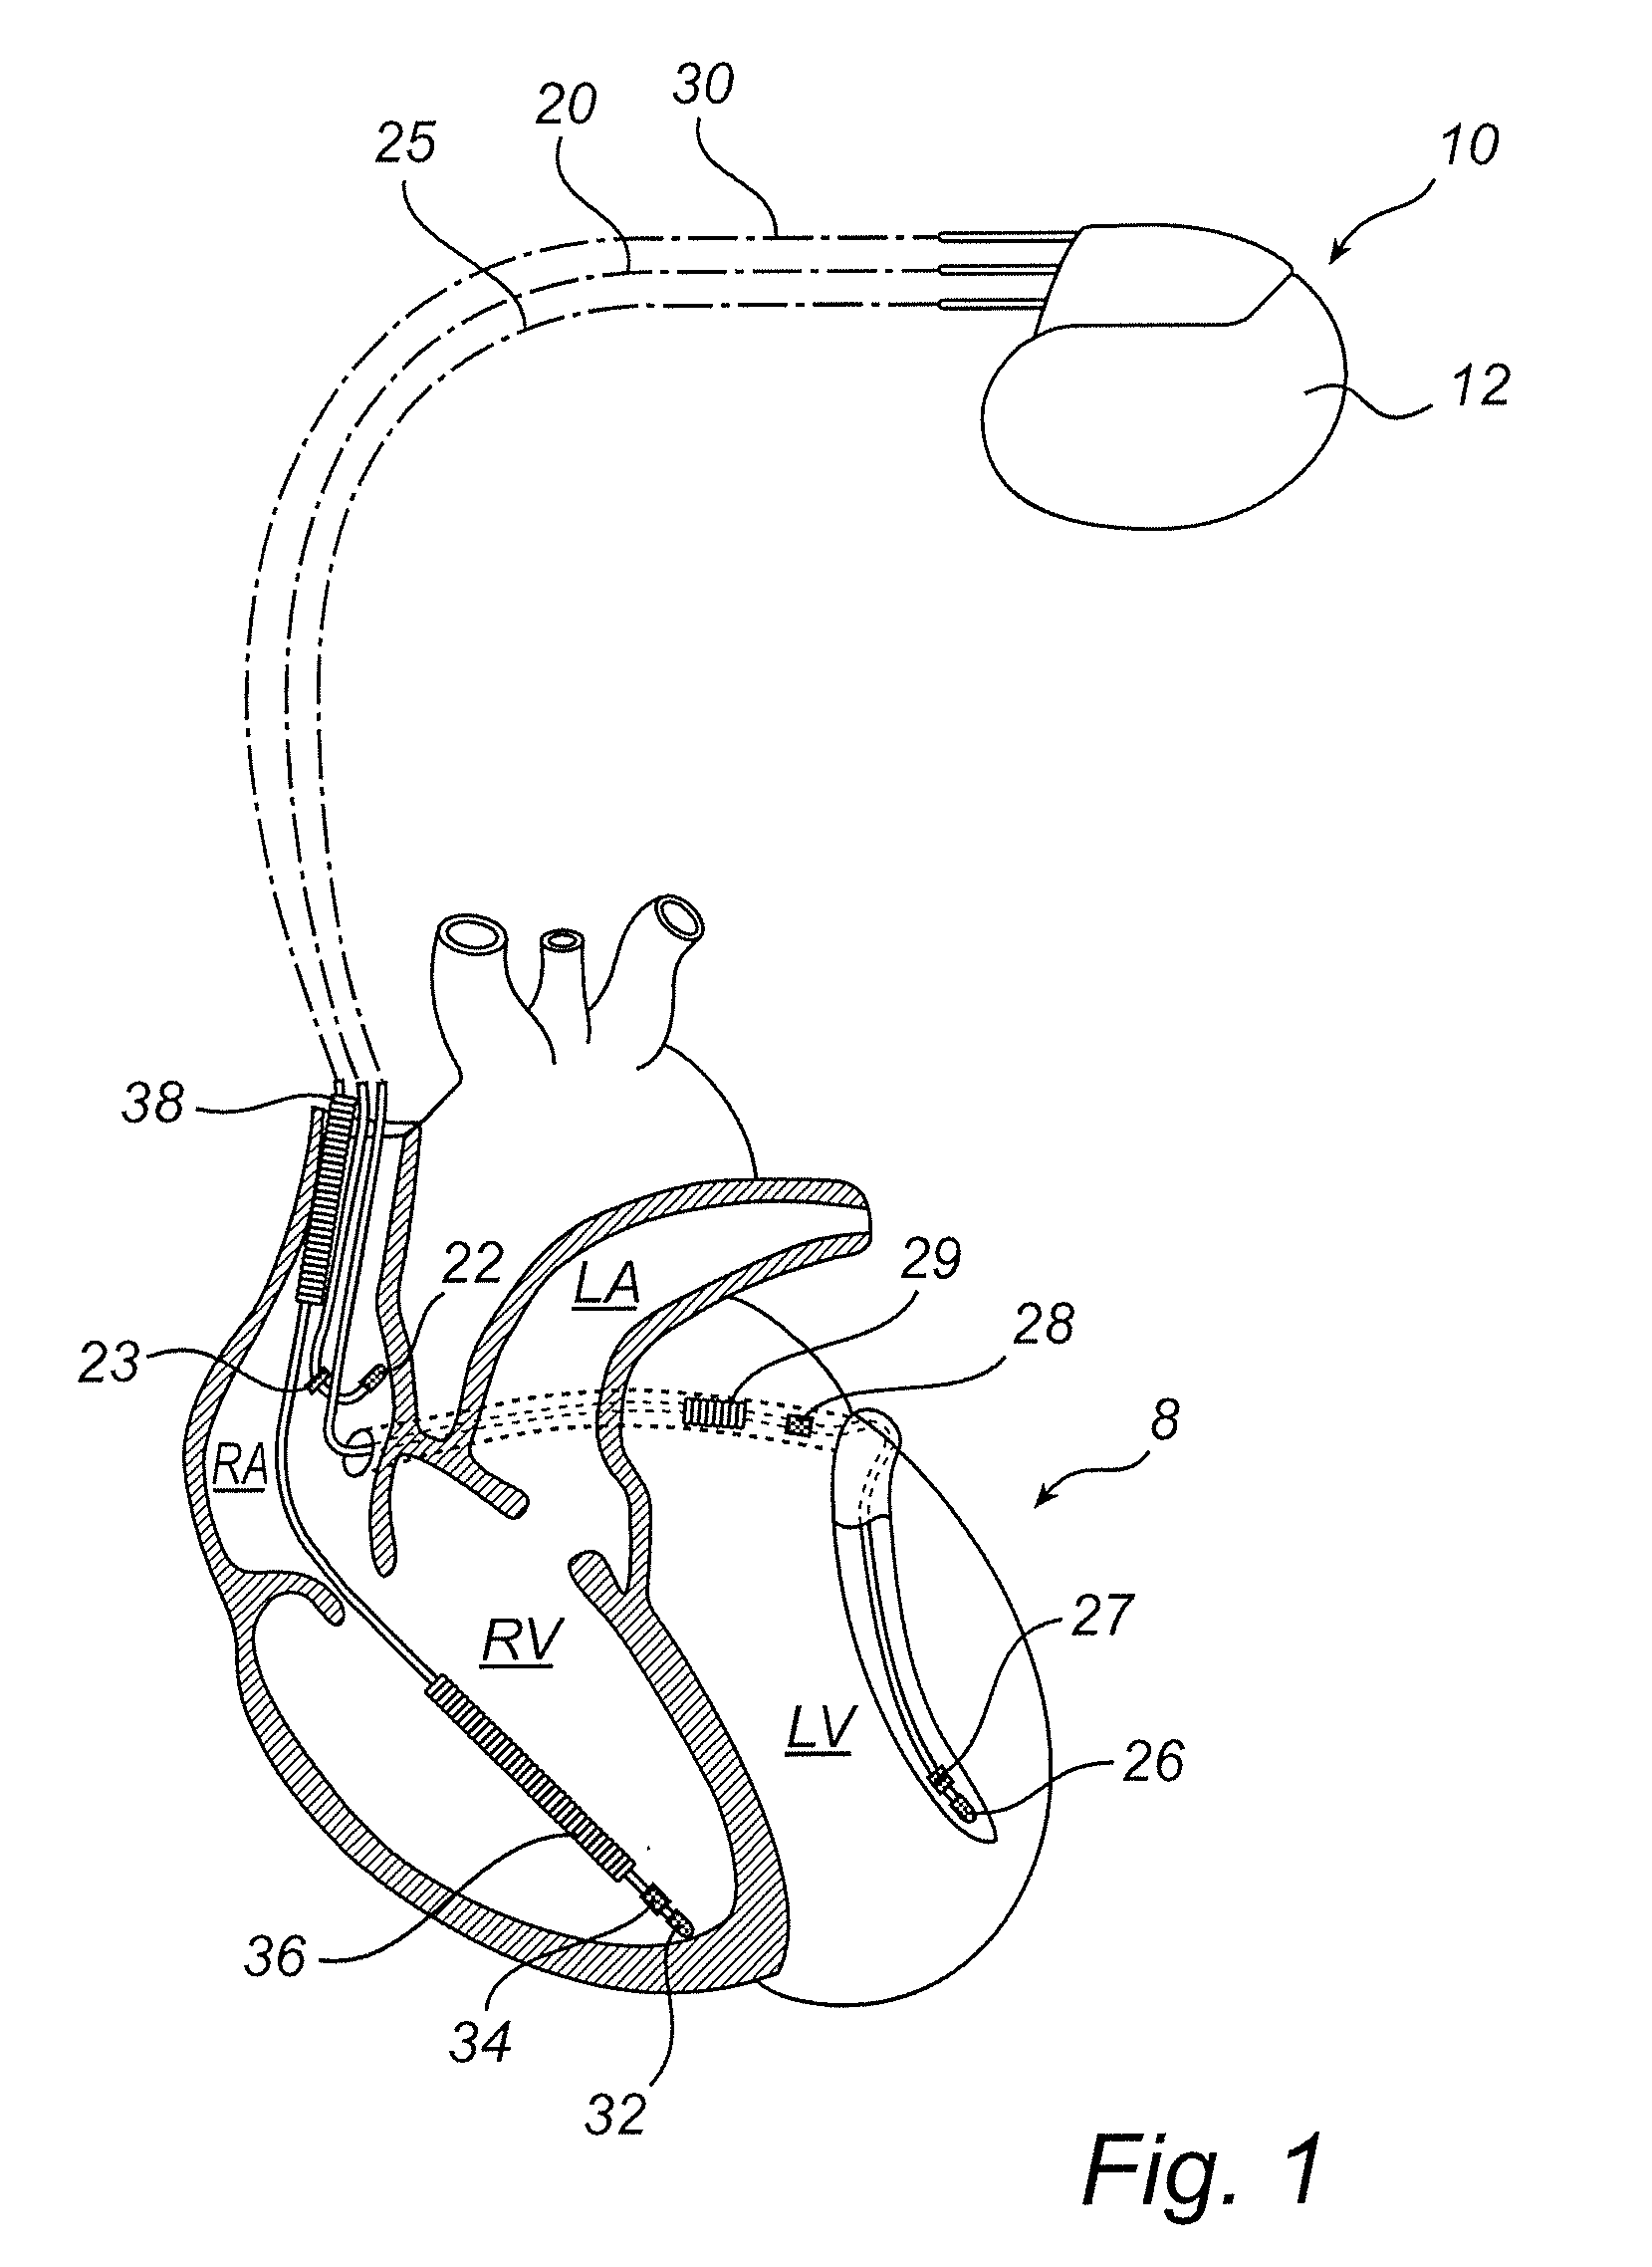 Implantable medical device and method for such a device for predicting hf status of a patient